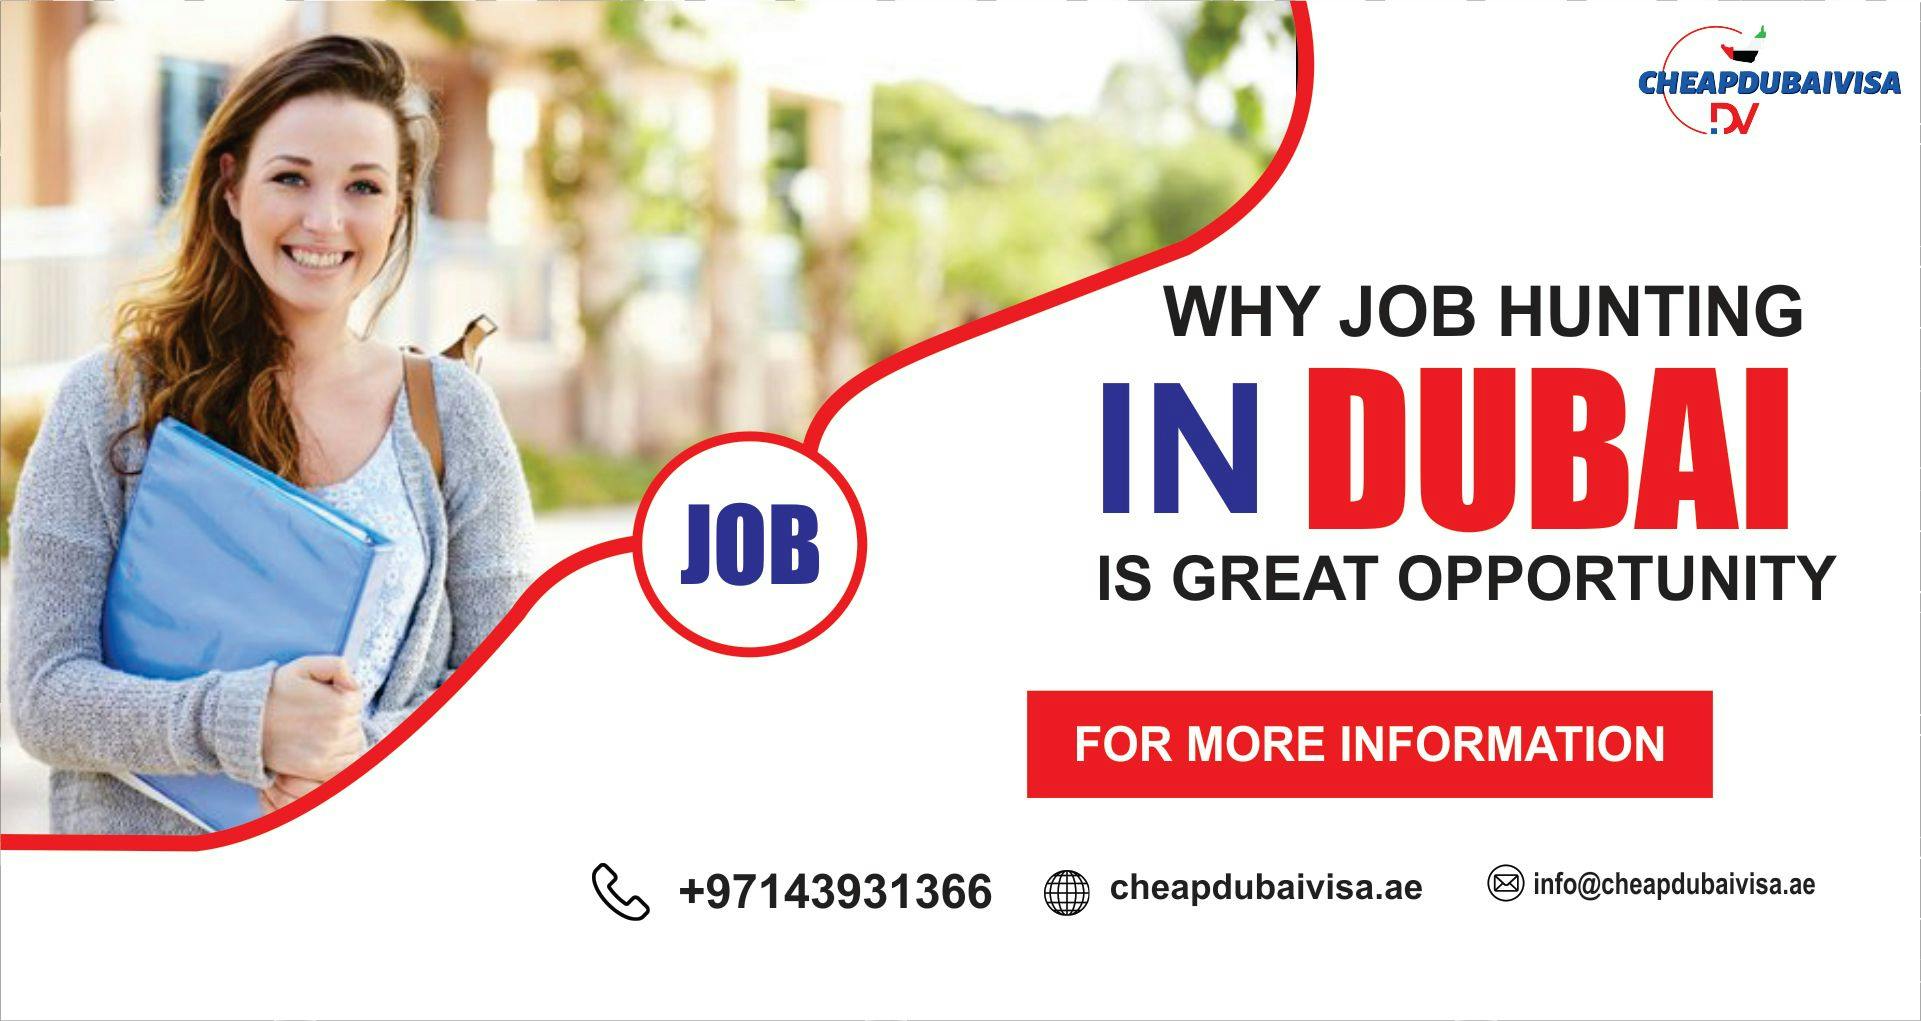 Why job hunting in Dubai is a great opportunity